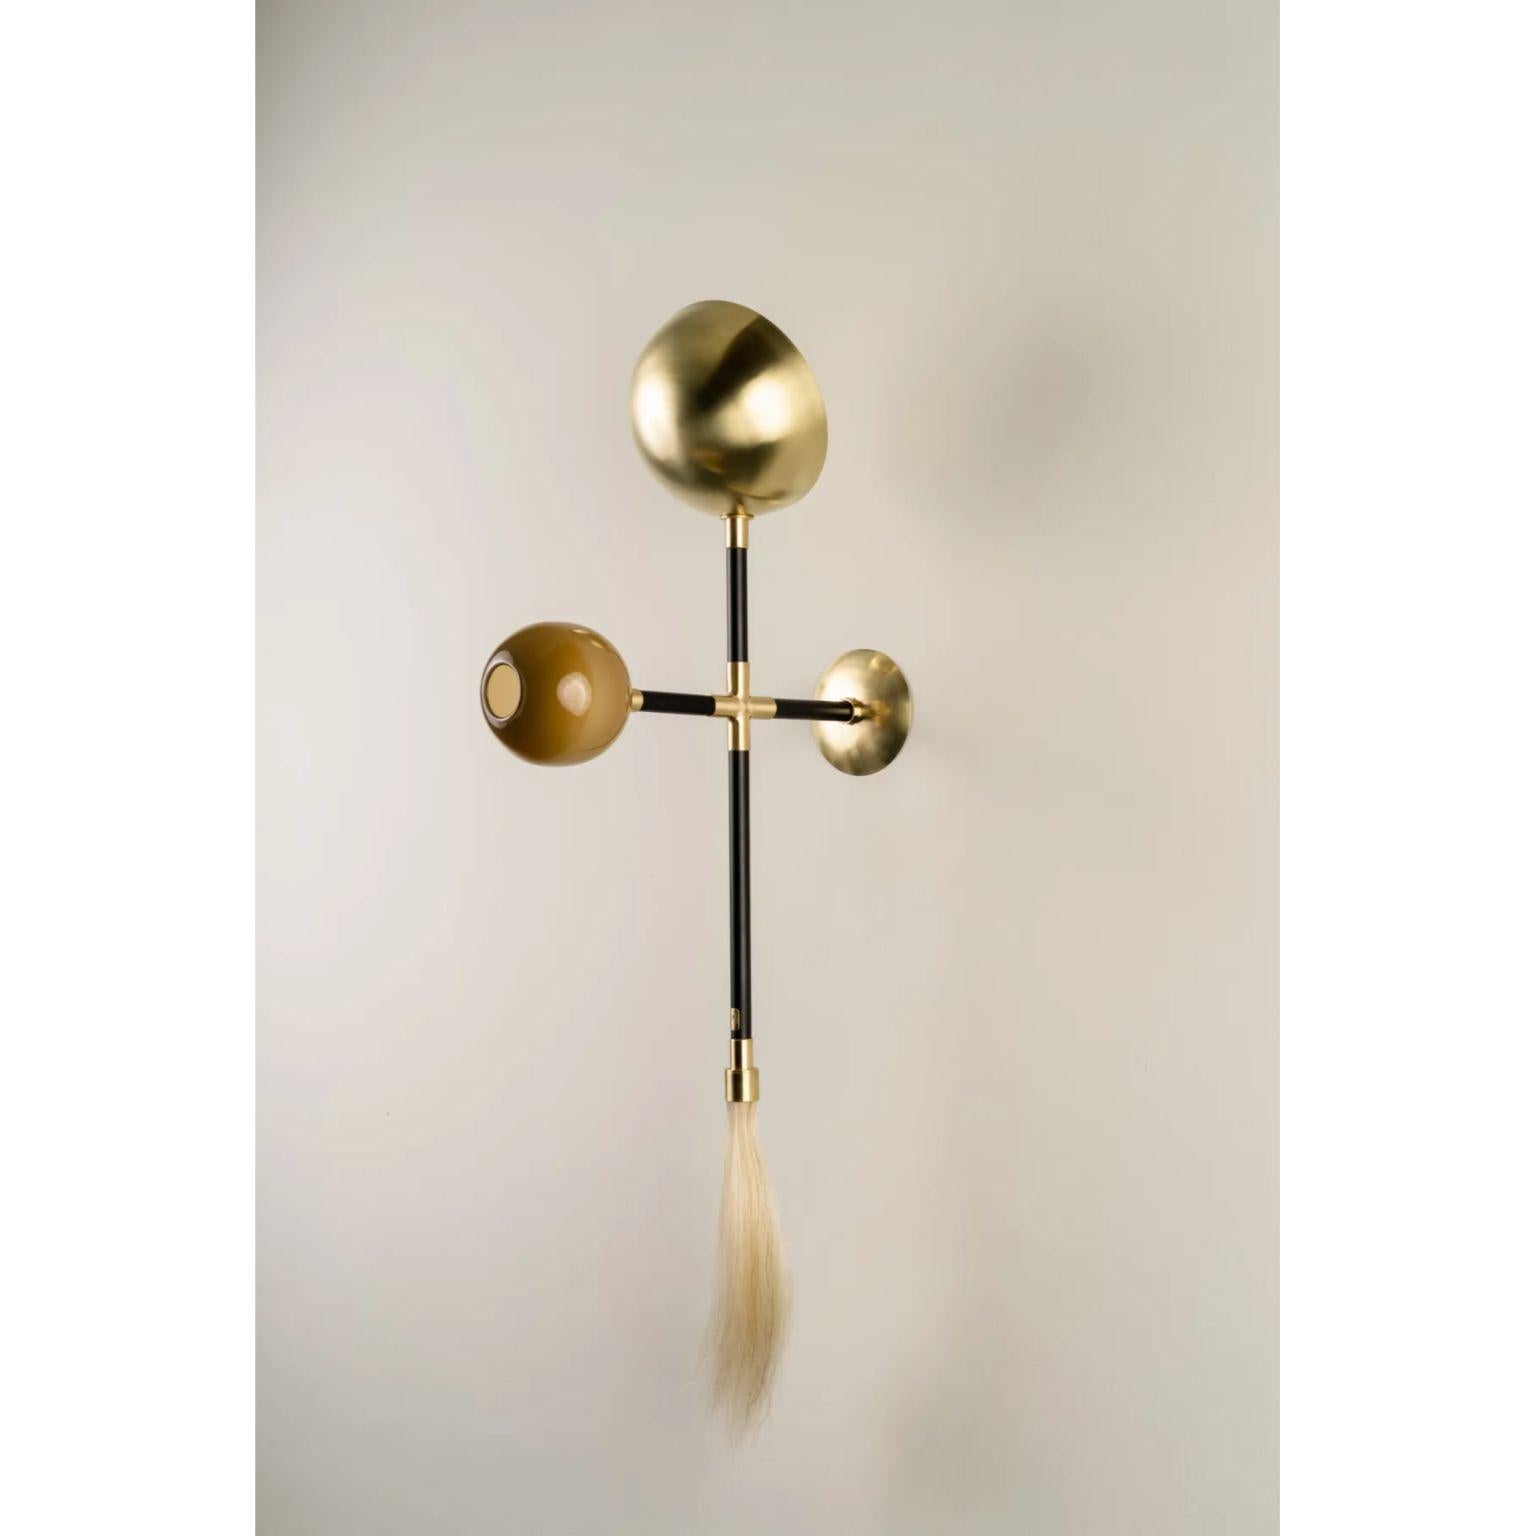 Gogo Sand Wall Lamp by Isabel Moncada
Dimensions: D 21 x W 40 x H 95 cm.
Materials: Brass with black finish and polished brass, blown glass globe and horsehair tassel.

Go-go, a term used in the 60’s to describe a frantic, pulsating expression of